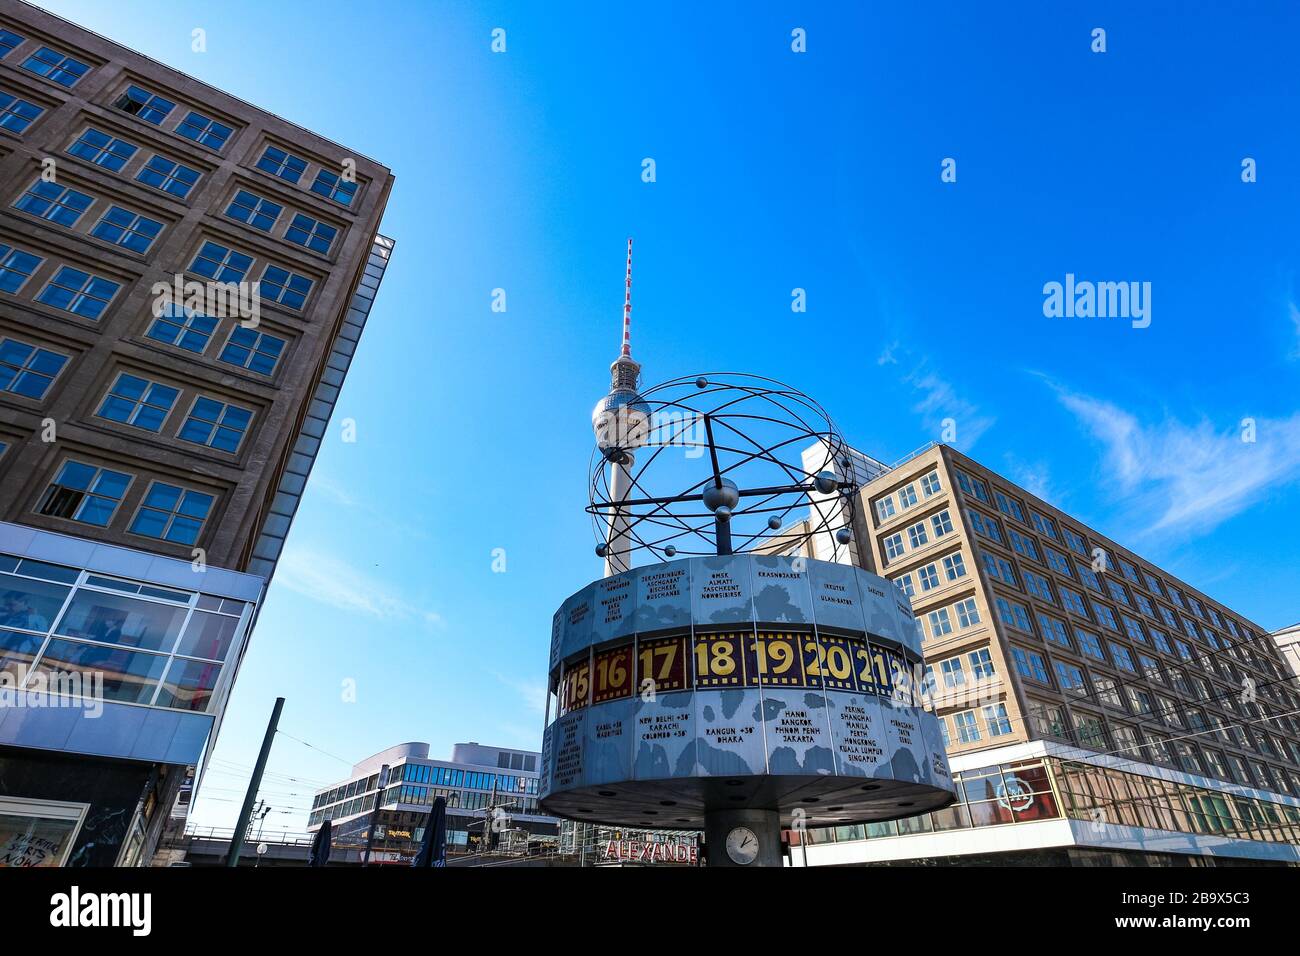 World Clock and Television Tower, two of the most prominent landmarks on Alexanderplatz, the major square in the eastern center of Berlin, Germany. Stock Photo